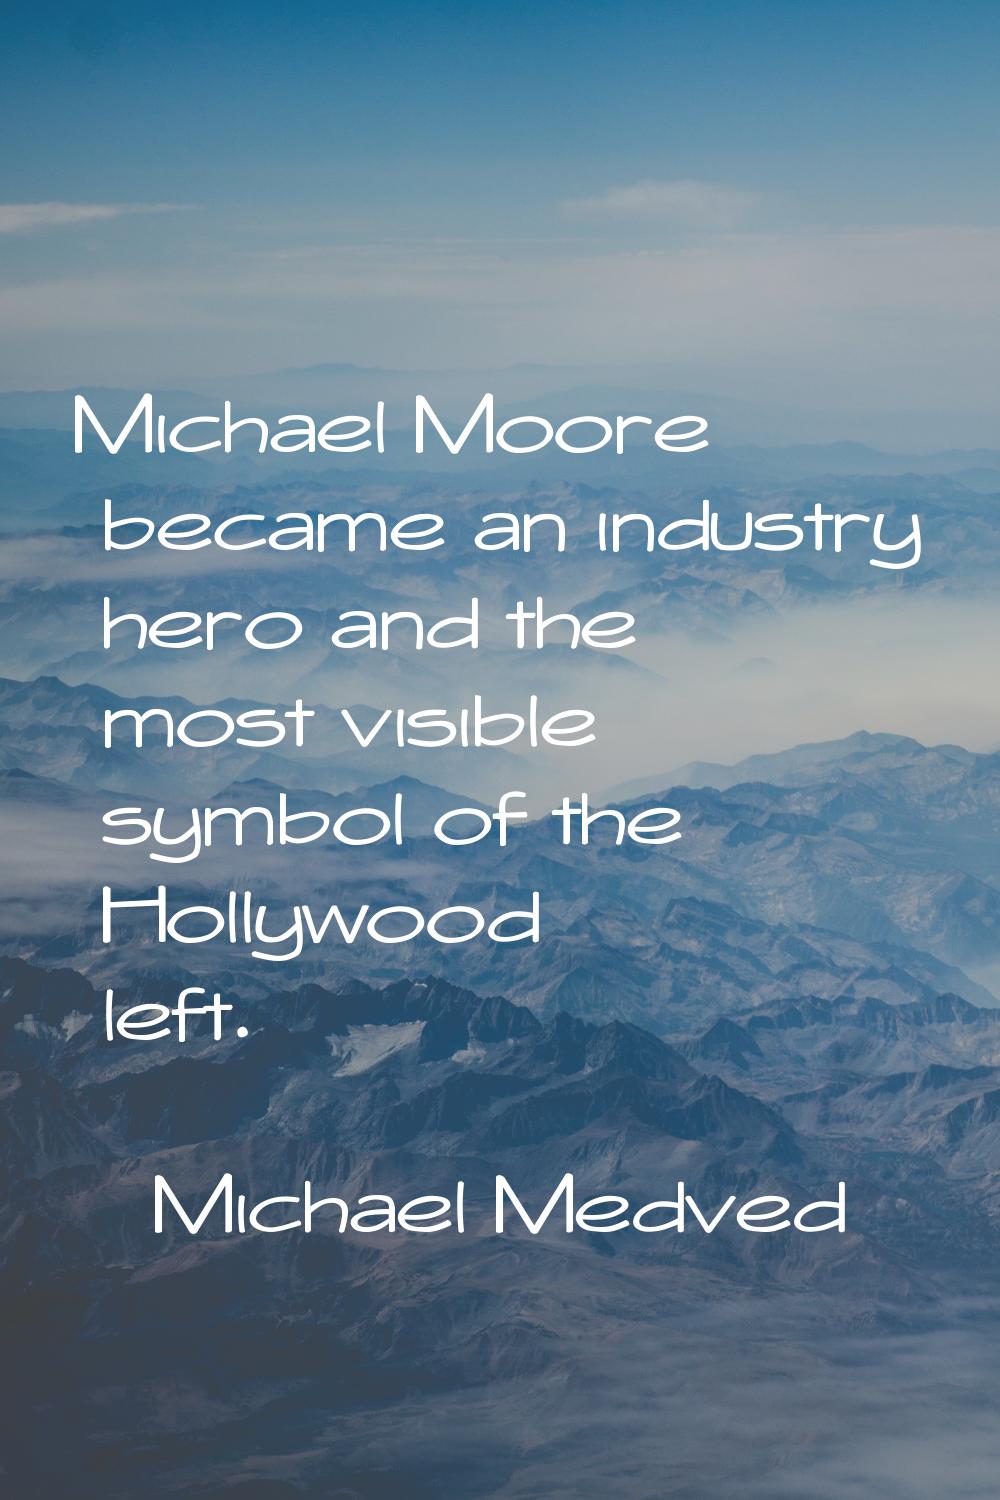 Michael Moore became an industry hero and the most visible symbol of the Hollywood left.